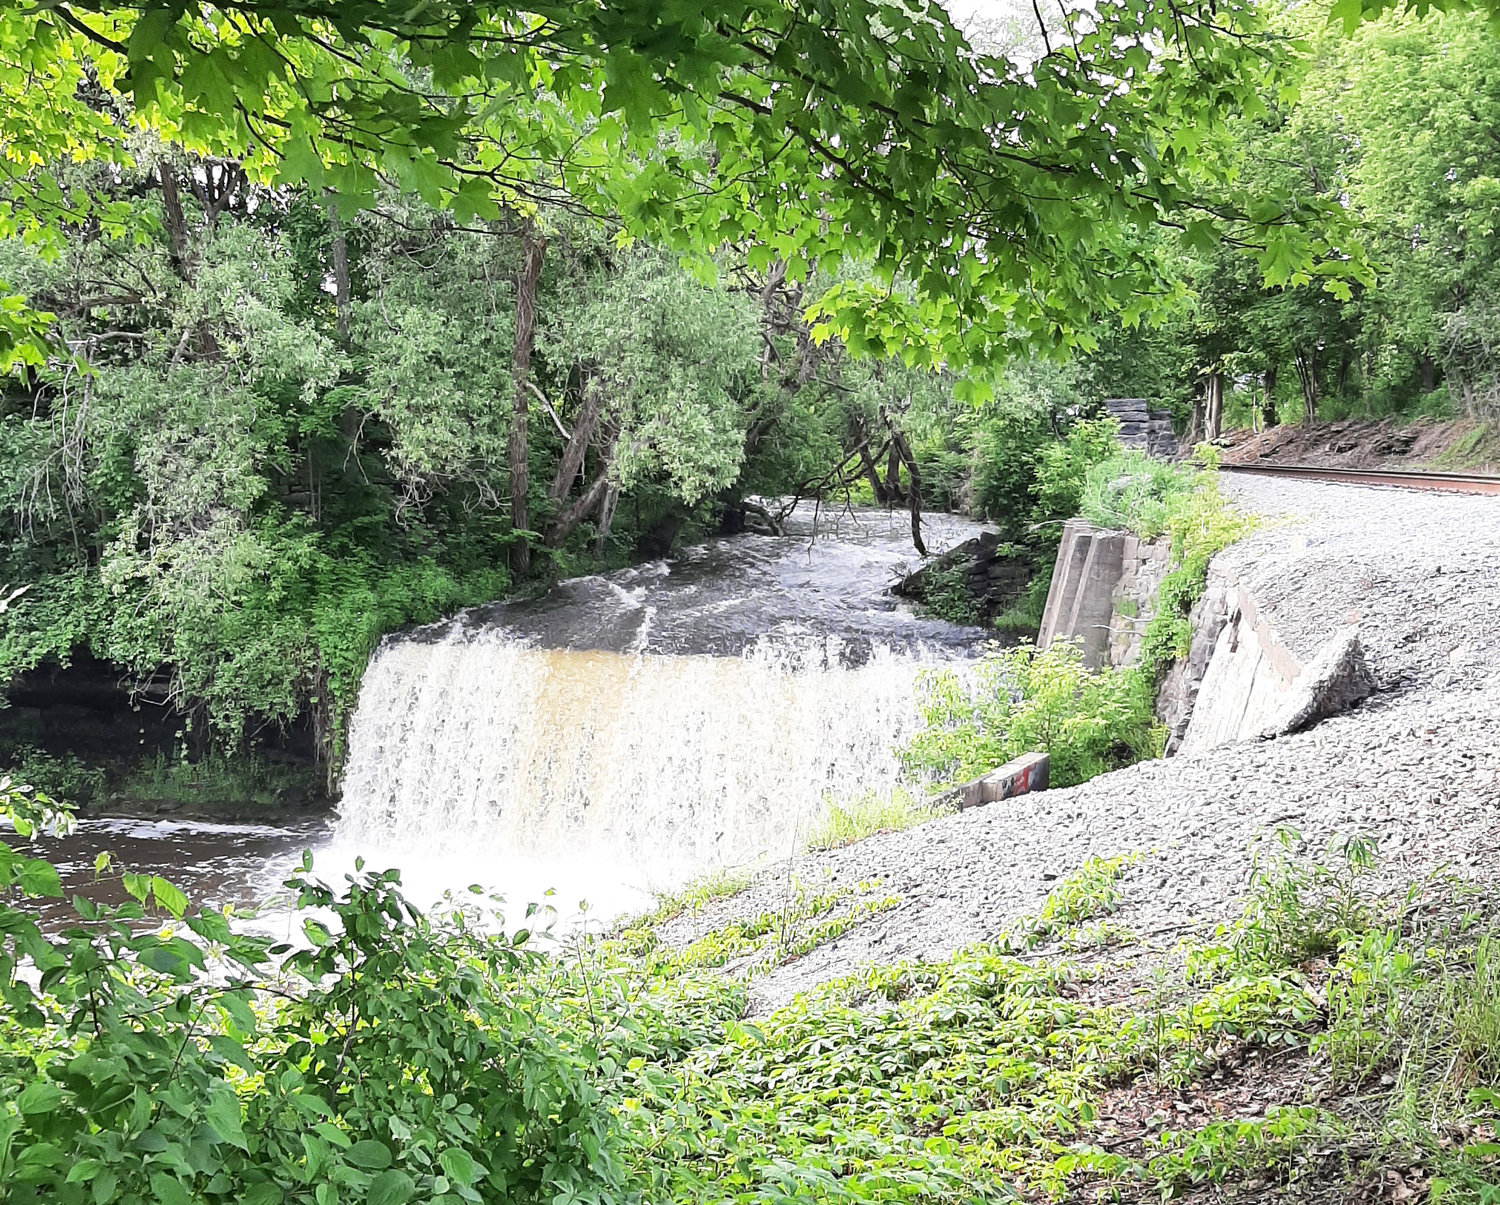 This is the Remsen falls after a heavy rain last week. Our Rotary club met there to discus plans for the village and Rotary memorial park.